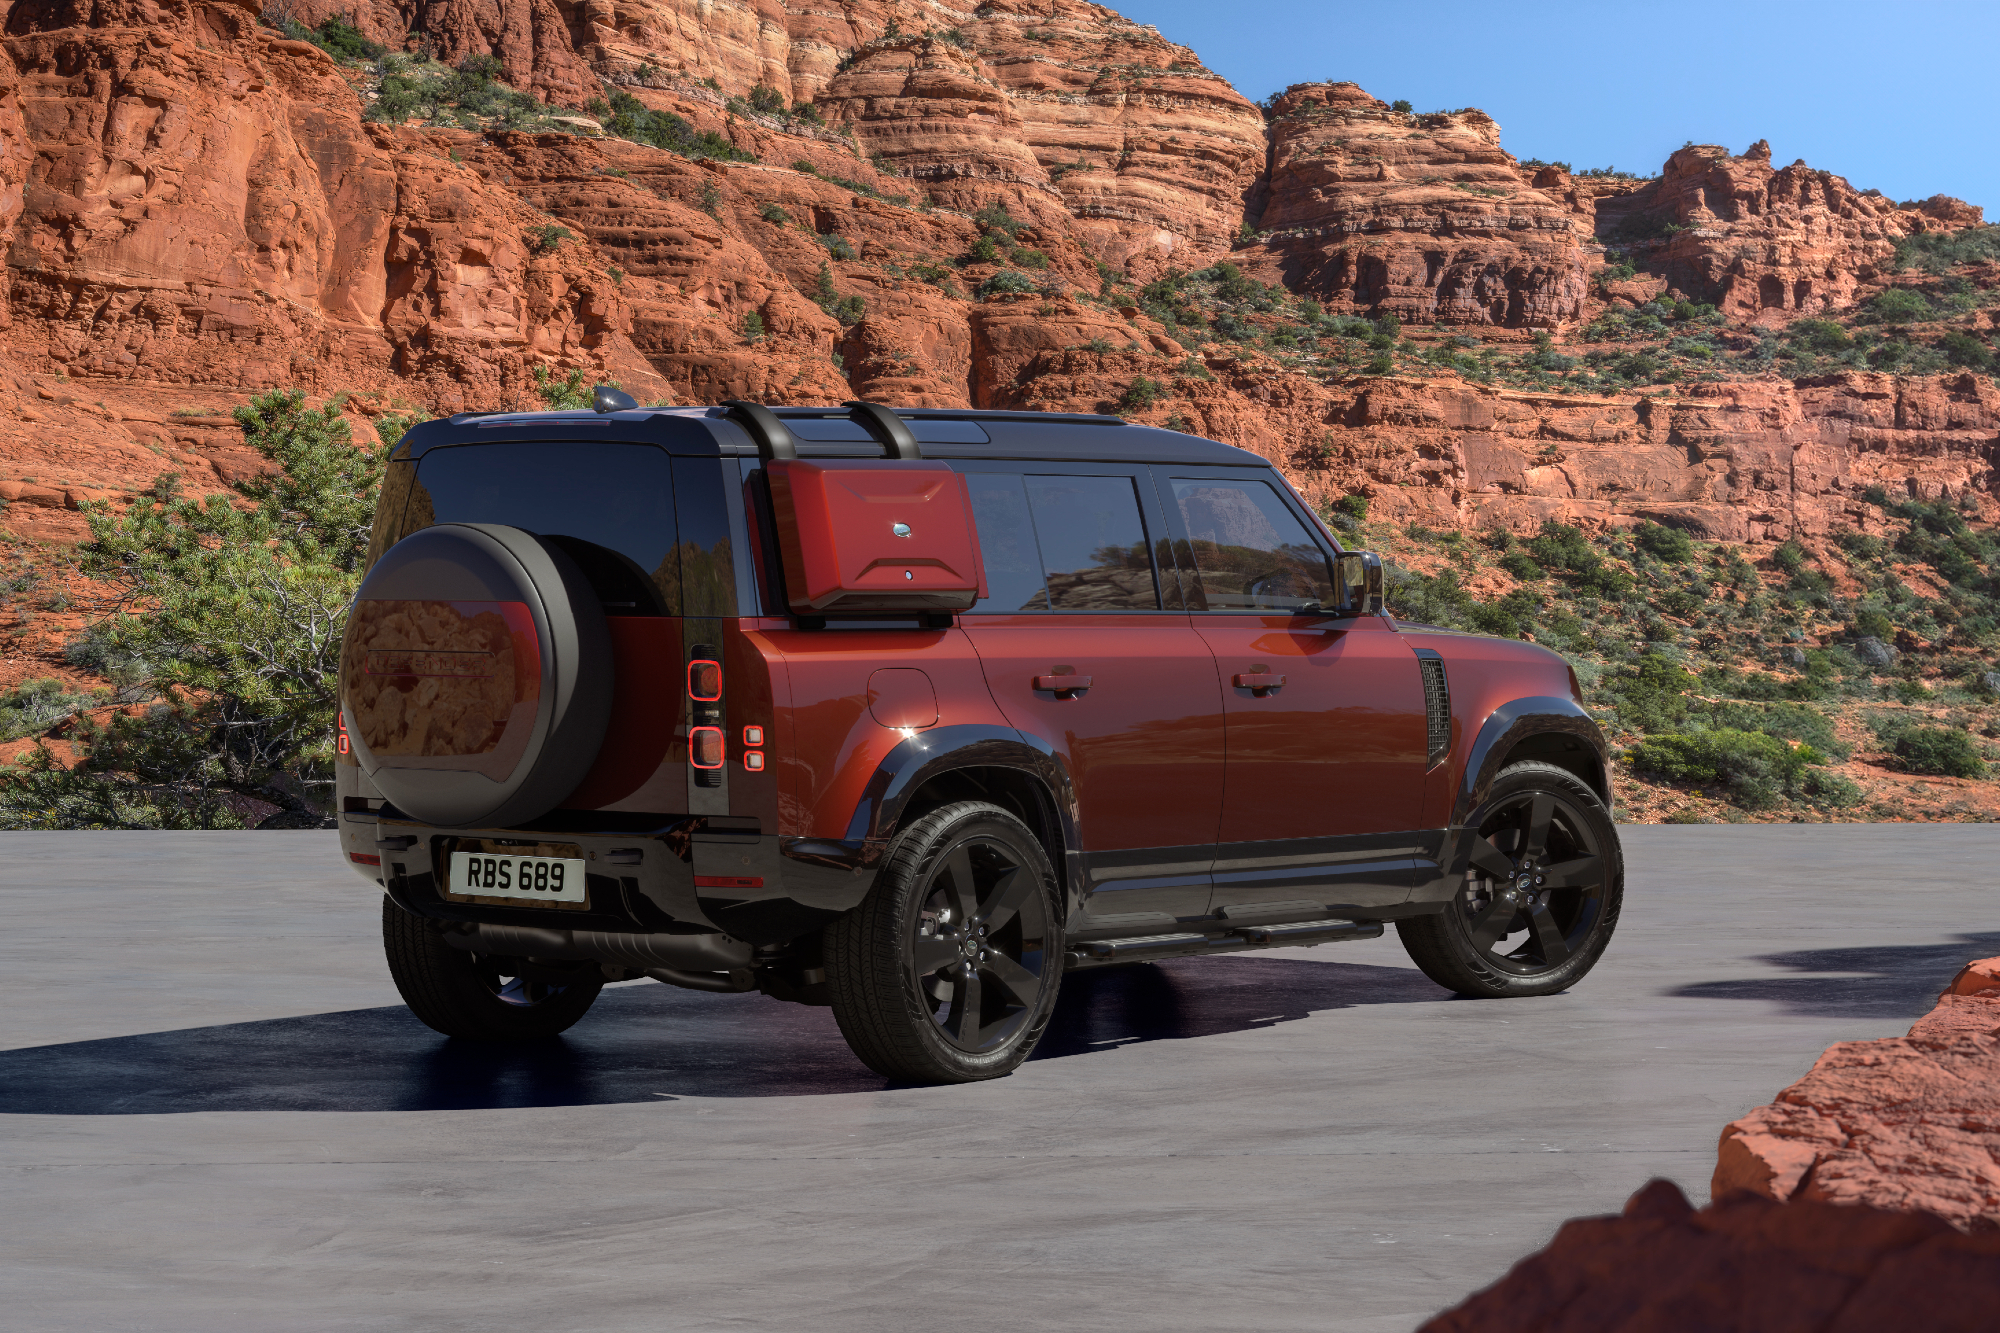 2025 Defender 110 Sedona Edition parked on desert sand with rocky hills in the background right rear three-quarter view